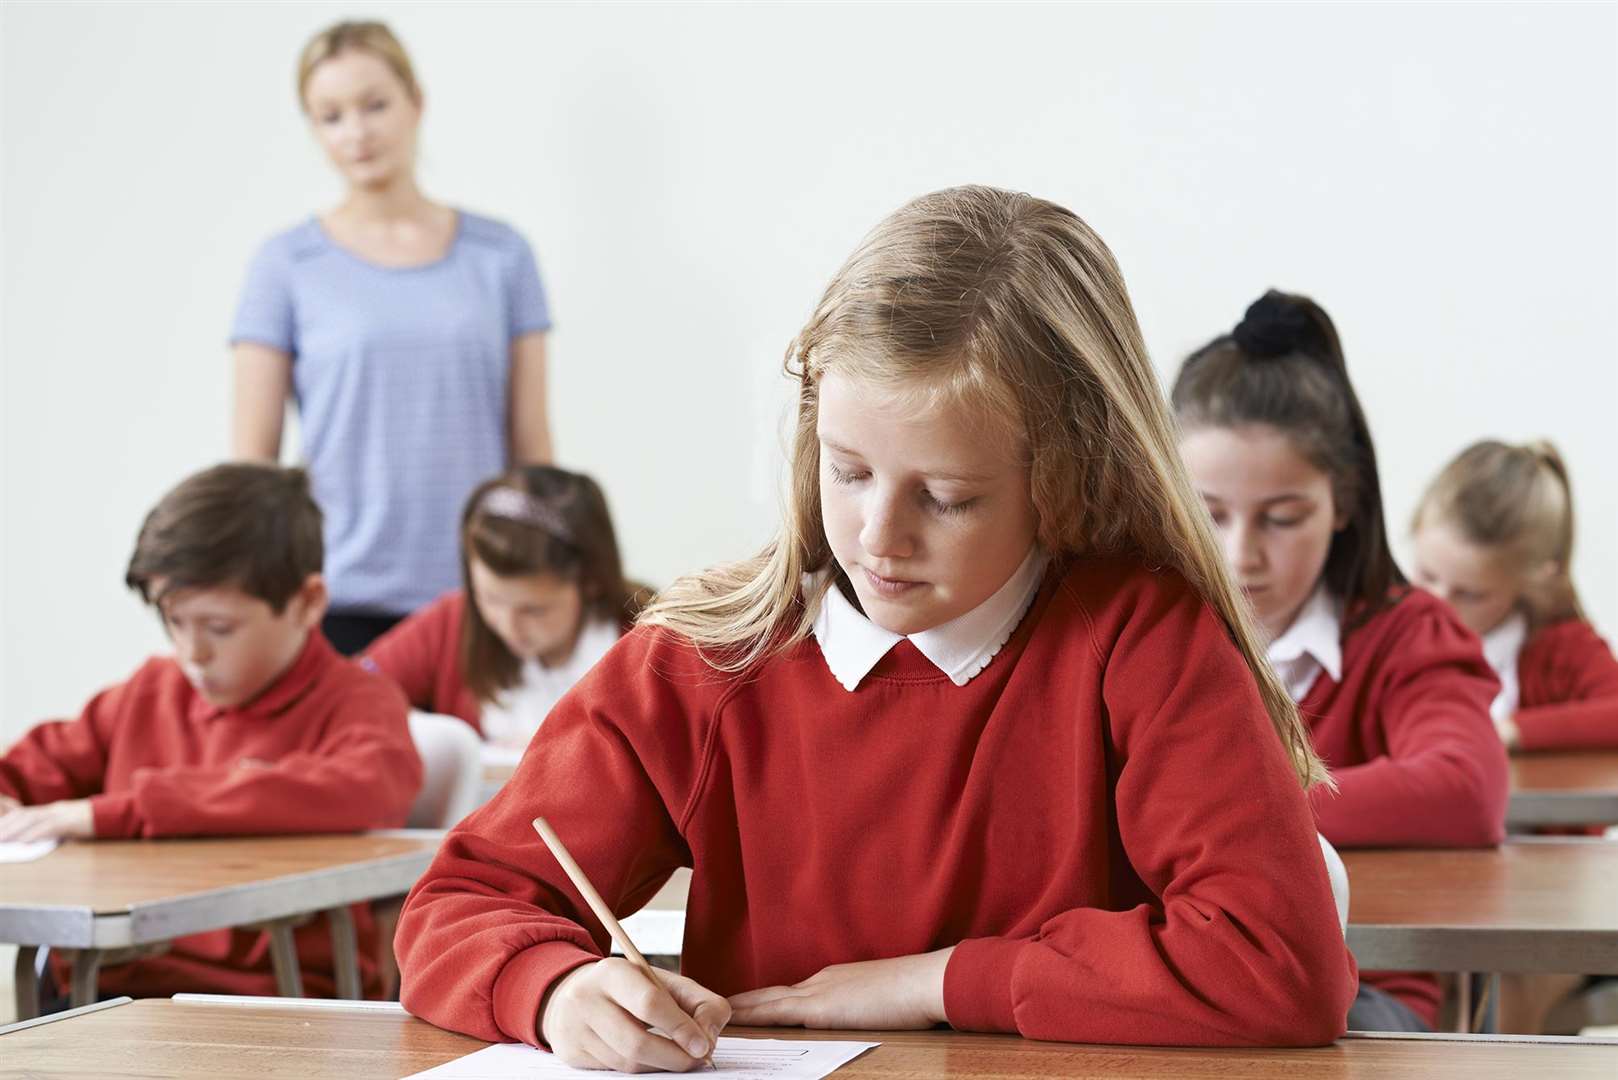 Encourage children to talk to their teacher if they are worried